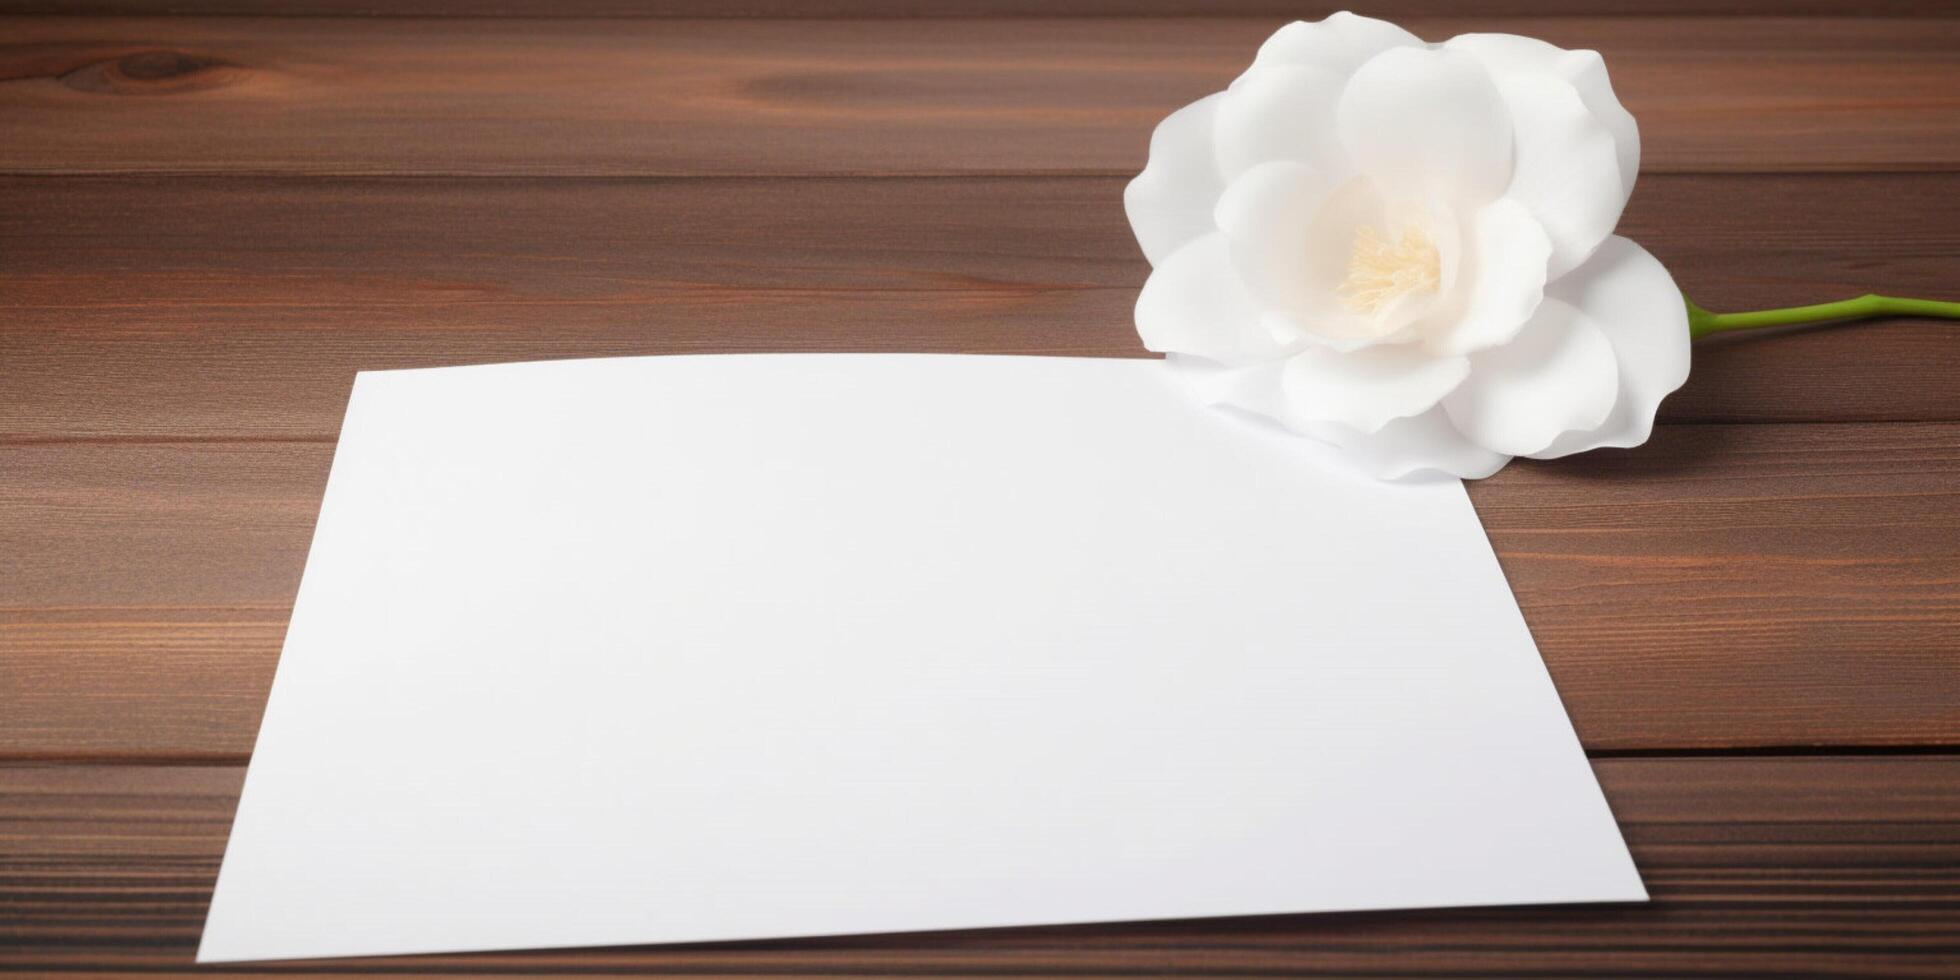 White rose on a wooden desk with paper photo